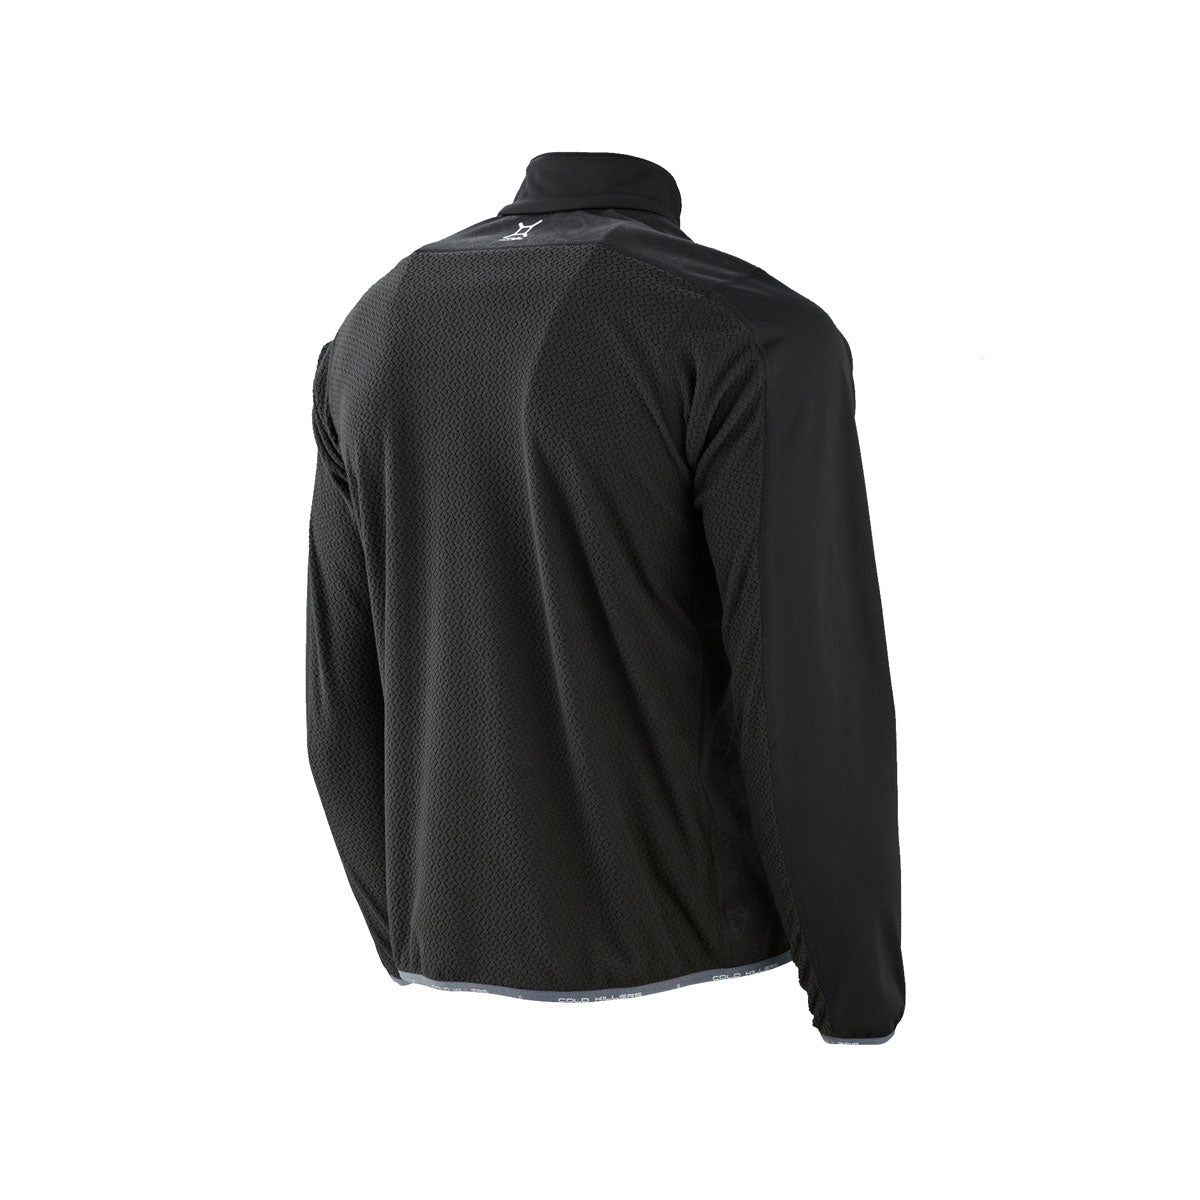 Knox: Cold Killers CORE Warm Sport Top for Men - Outdoor Travel Gear 2